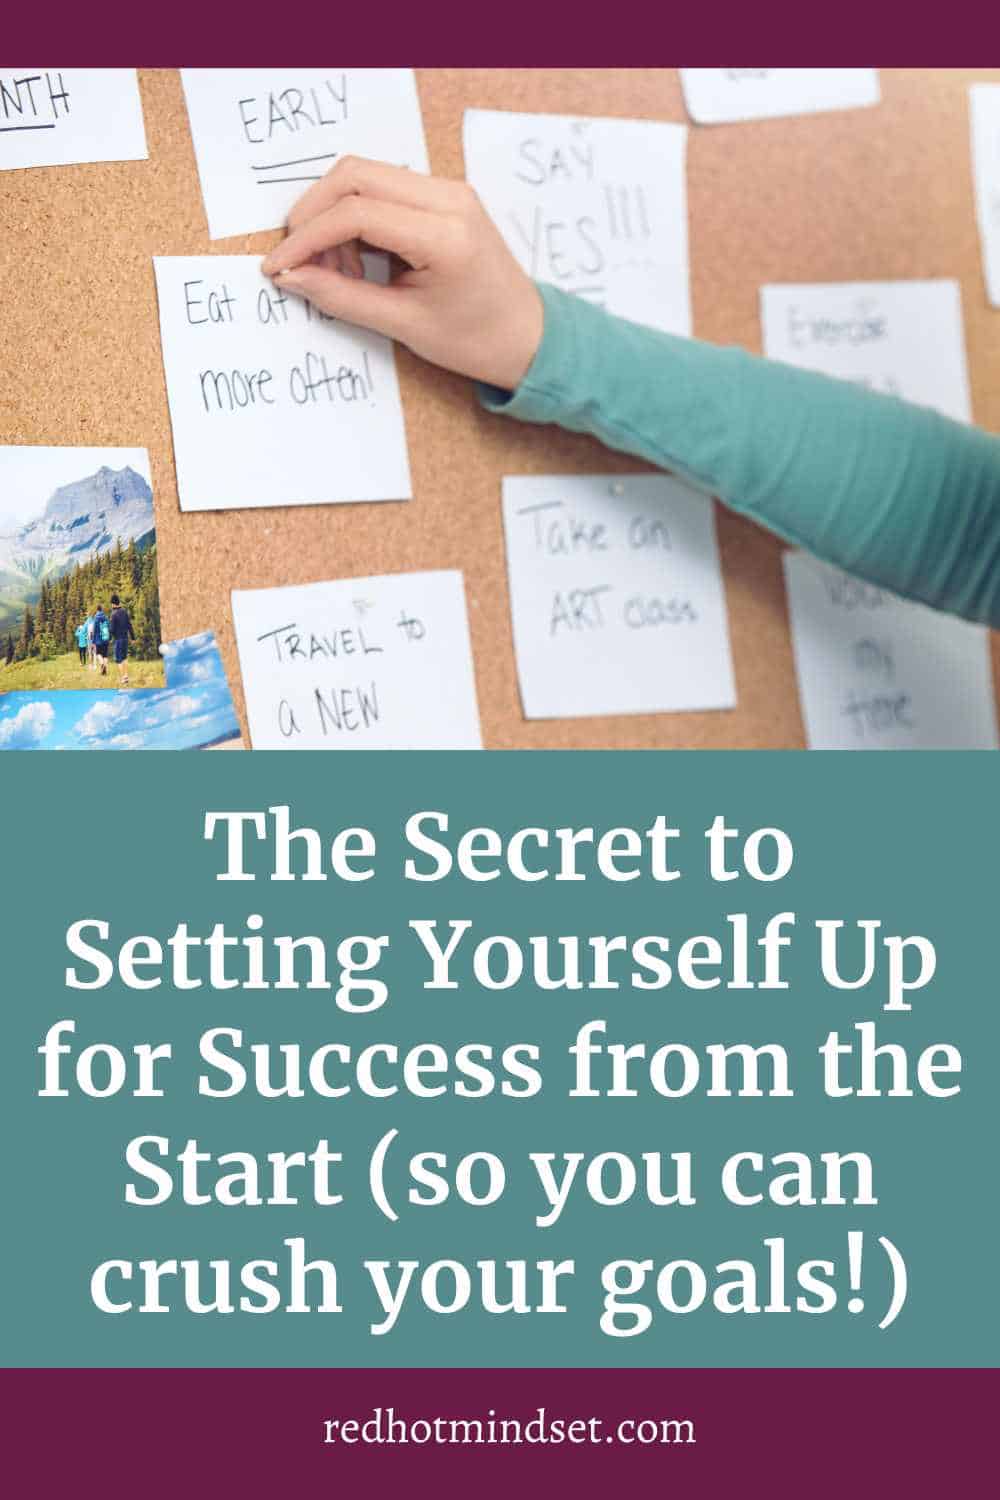 Ep 175 | The Secret to Setting Yourself Up for Success from the Start (so you can crush your goals!) with Gillian Perkins